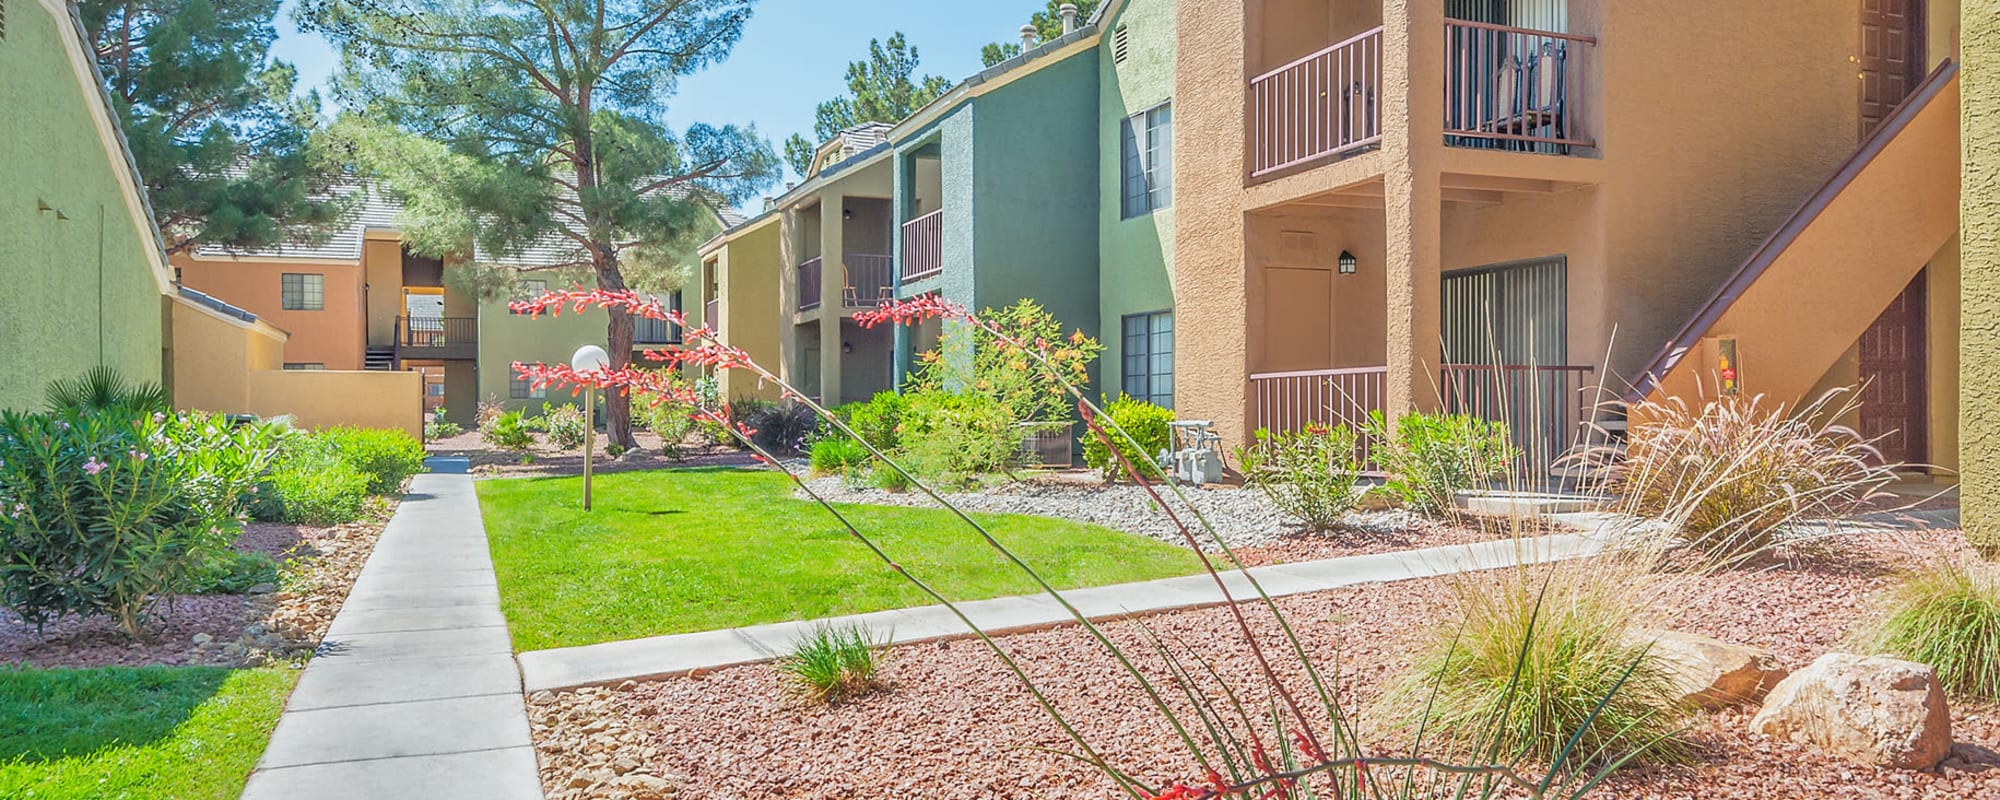 Pet-friendly apartments at Shelter Cove Apartments in Las Vegas, Nevada